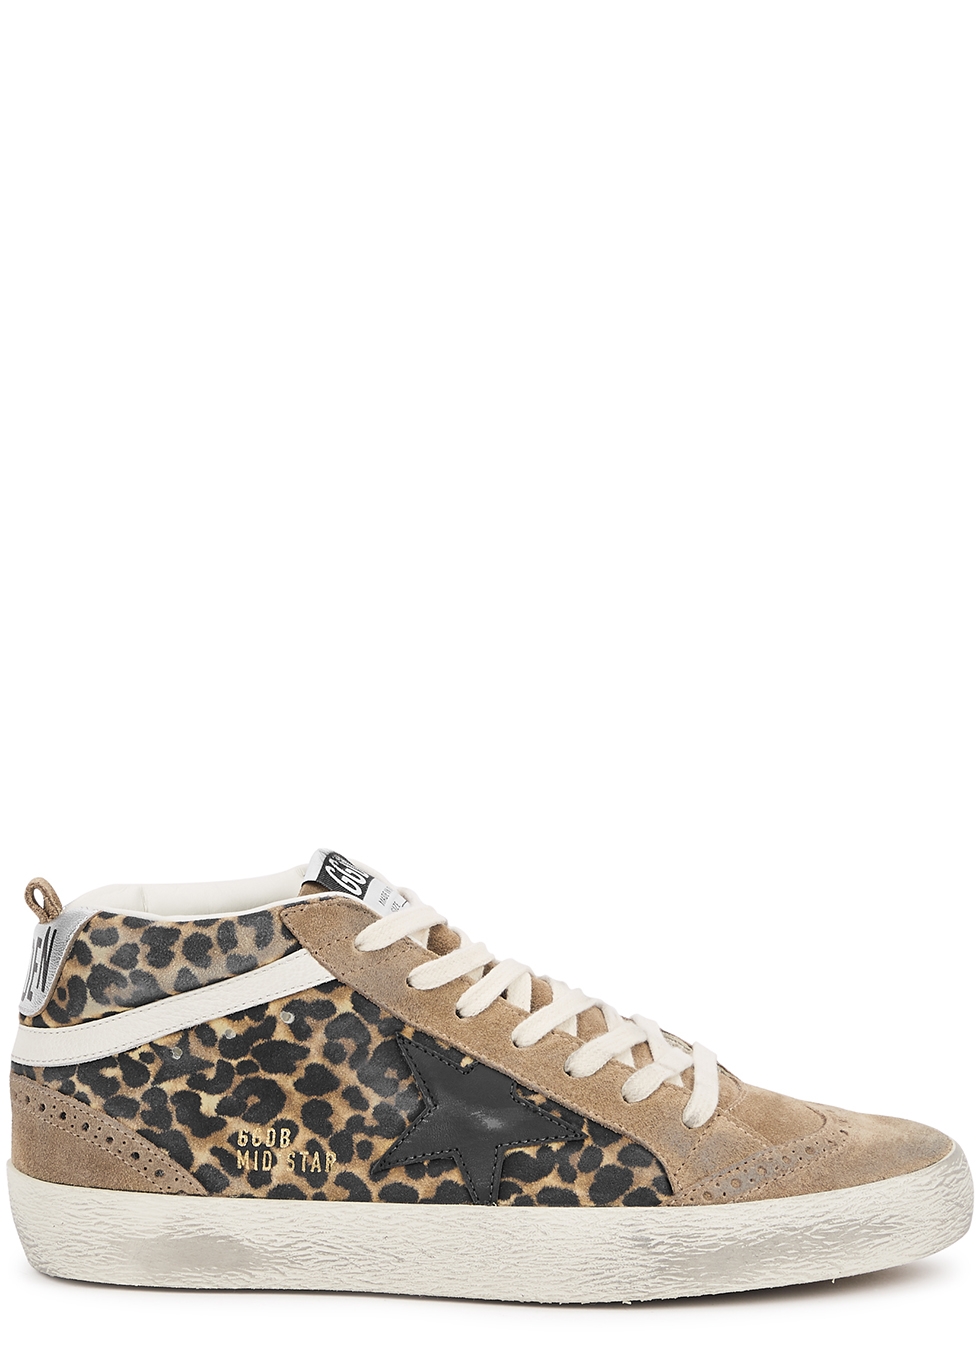 Mid Star leopard-print distressed suede sneakers